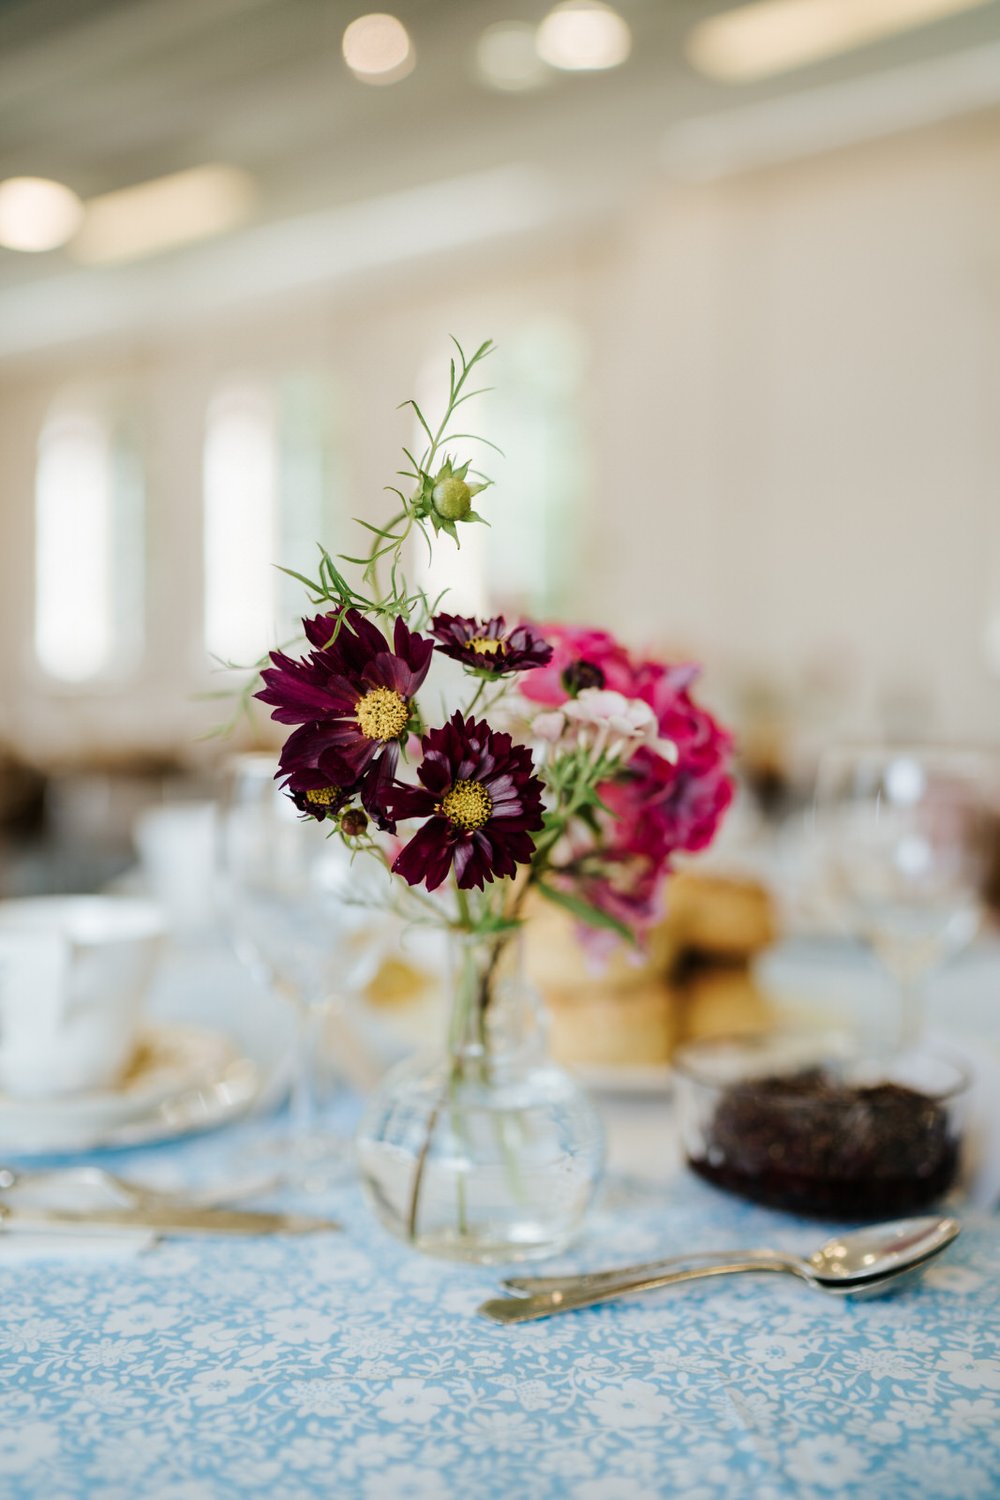 Violet and purple flowers in small vase on table during Orleans House Gallery wedding reception at The Stables